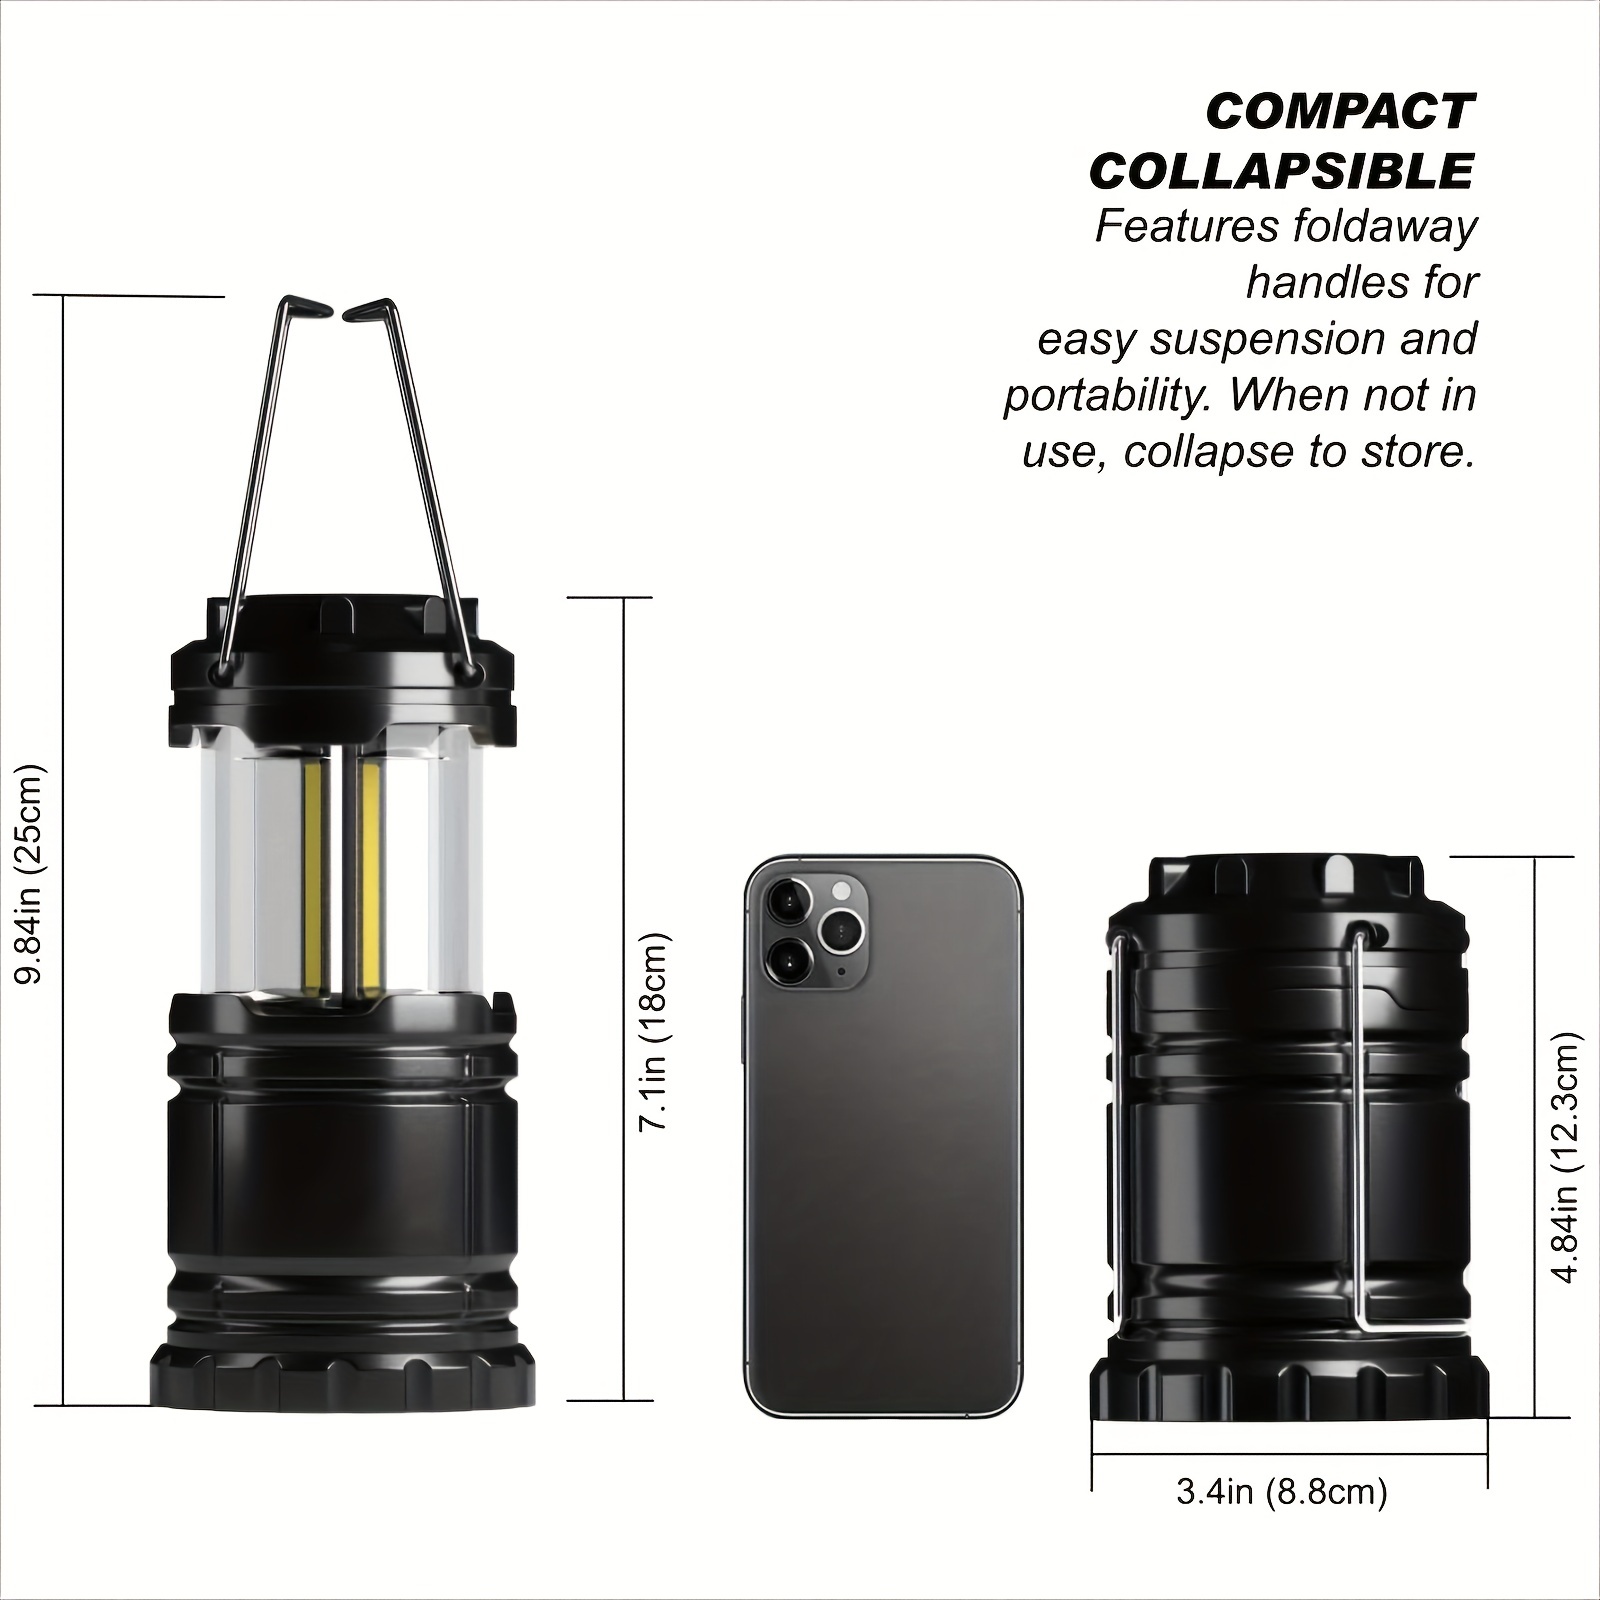 Super Bright Led Foldable Lantern - Waterproof And Portable